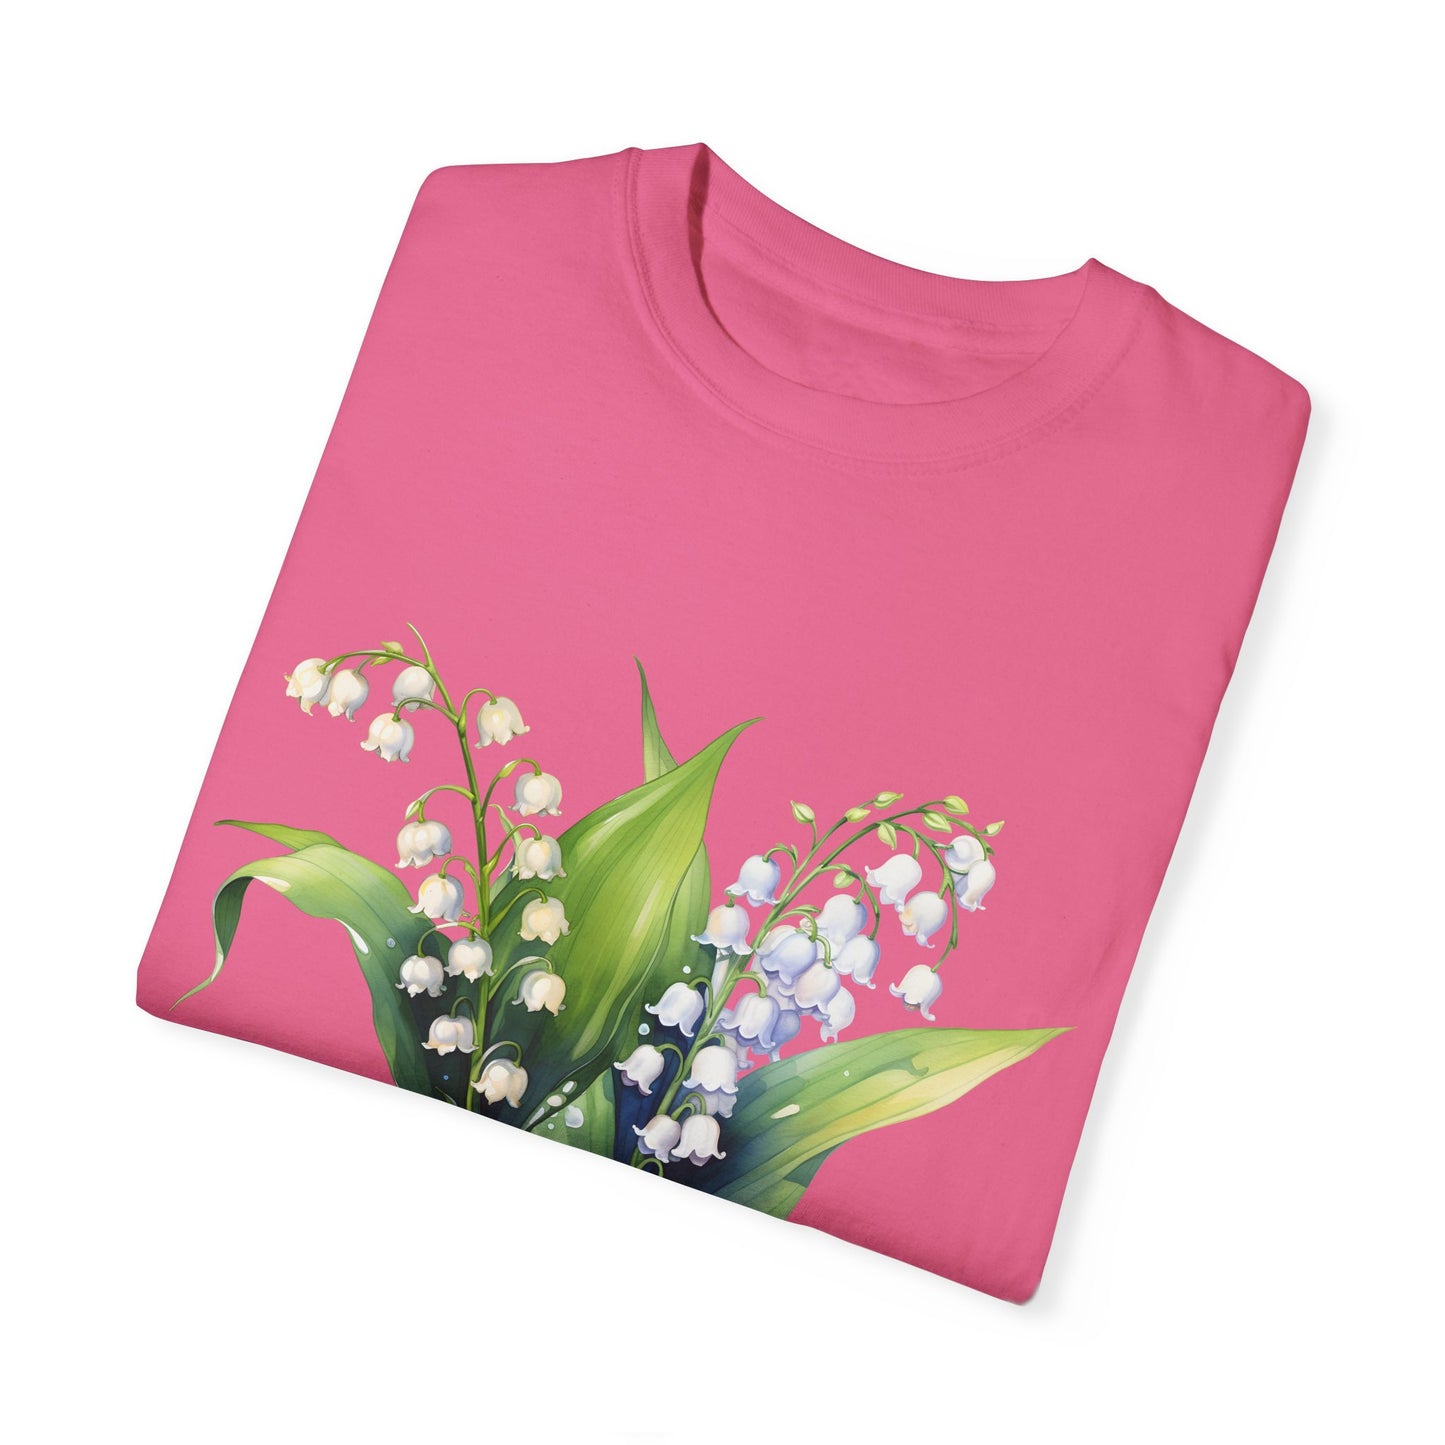 May Birth Flower "Lily of the Valley" - Unisex Garment-Dyed T-shirt